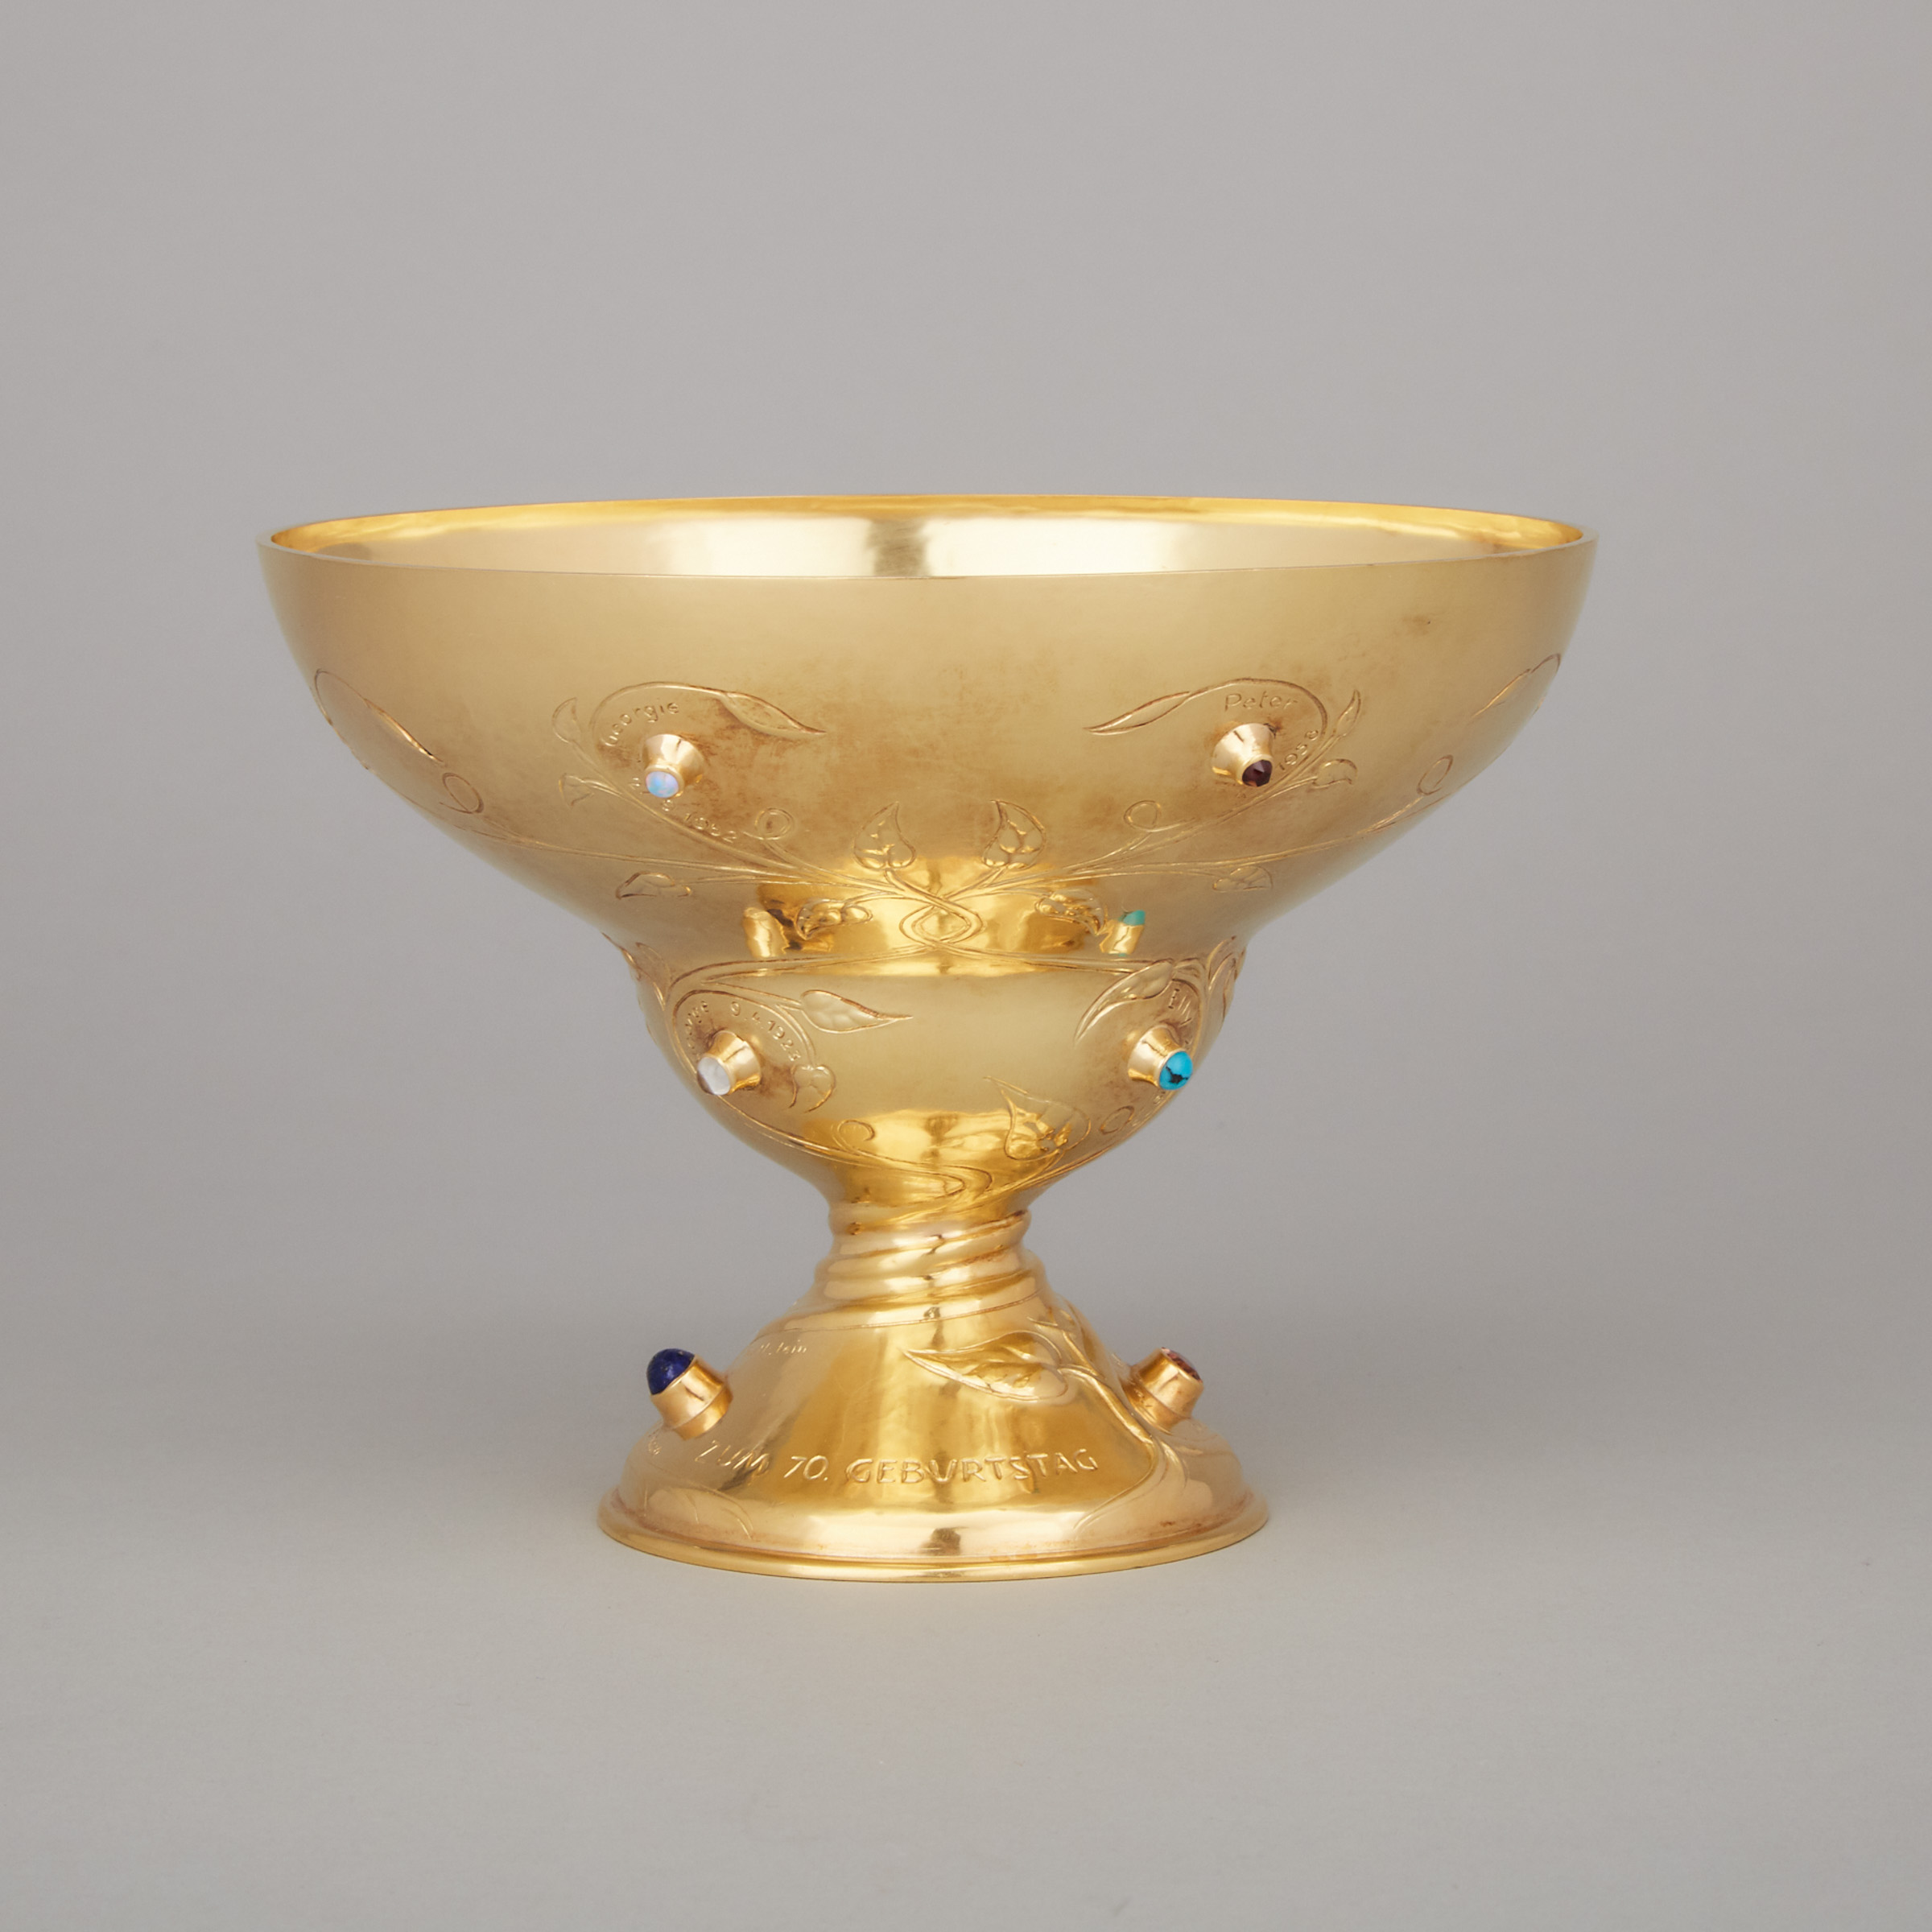 Swiss Yellow Gold Footed Bowl, Meister, Zurich, c.1961